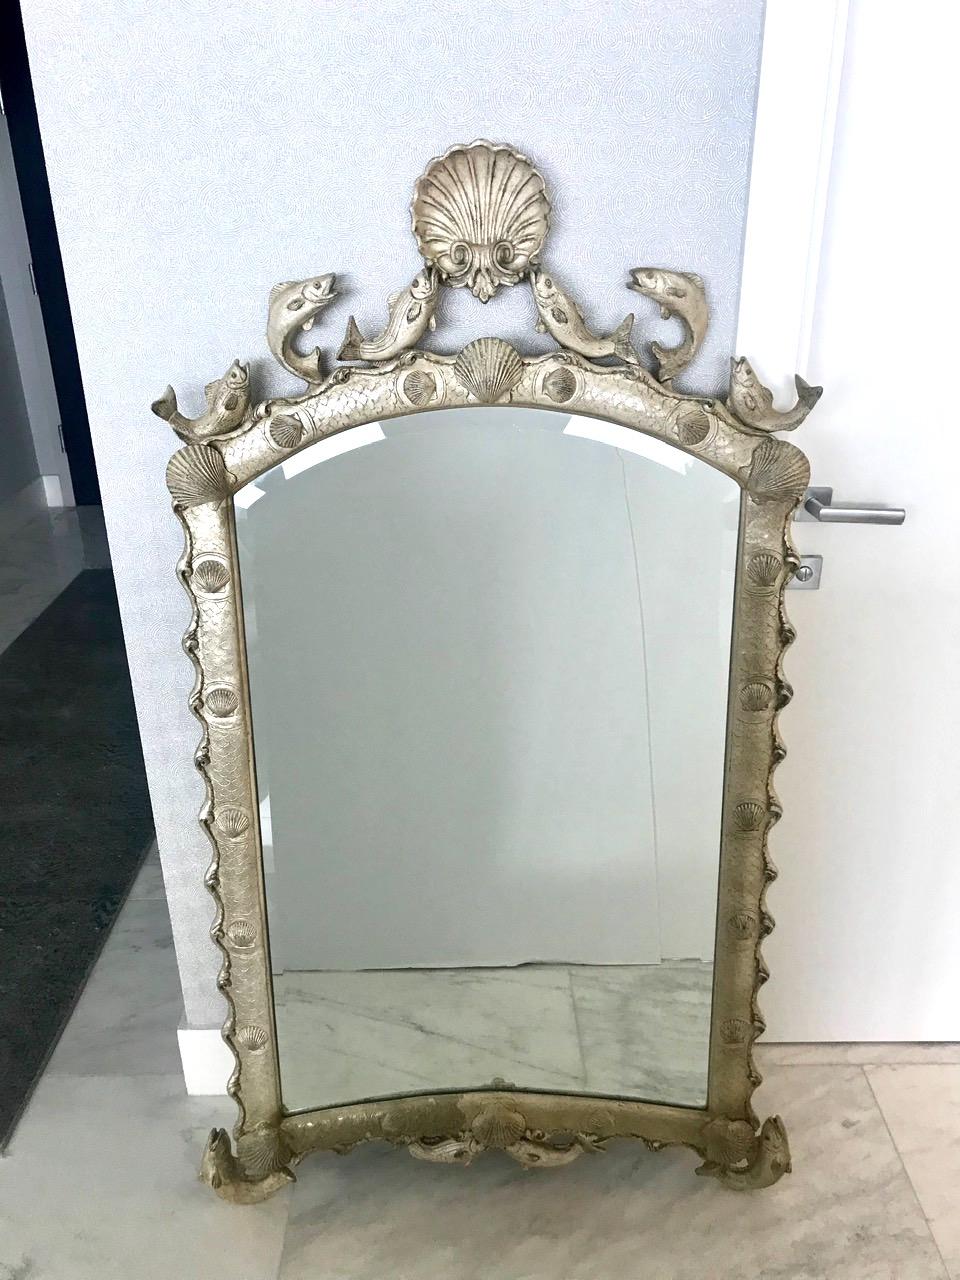 American Exquisite Hollywood Regency Scalloped Mirror in Antique Sterling Silver Leaf